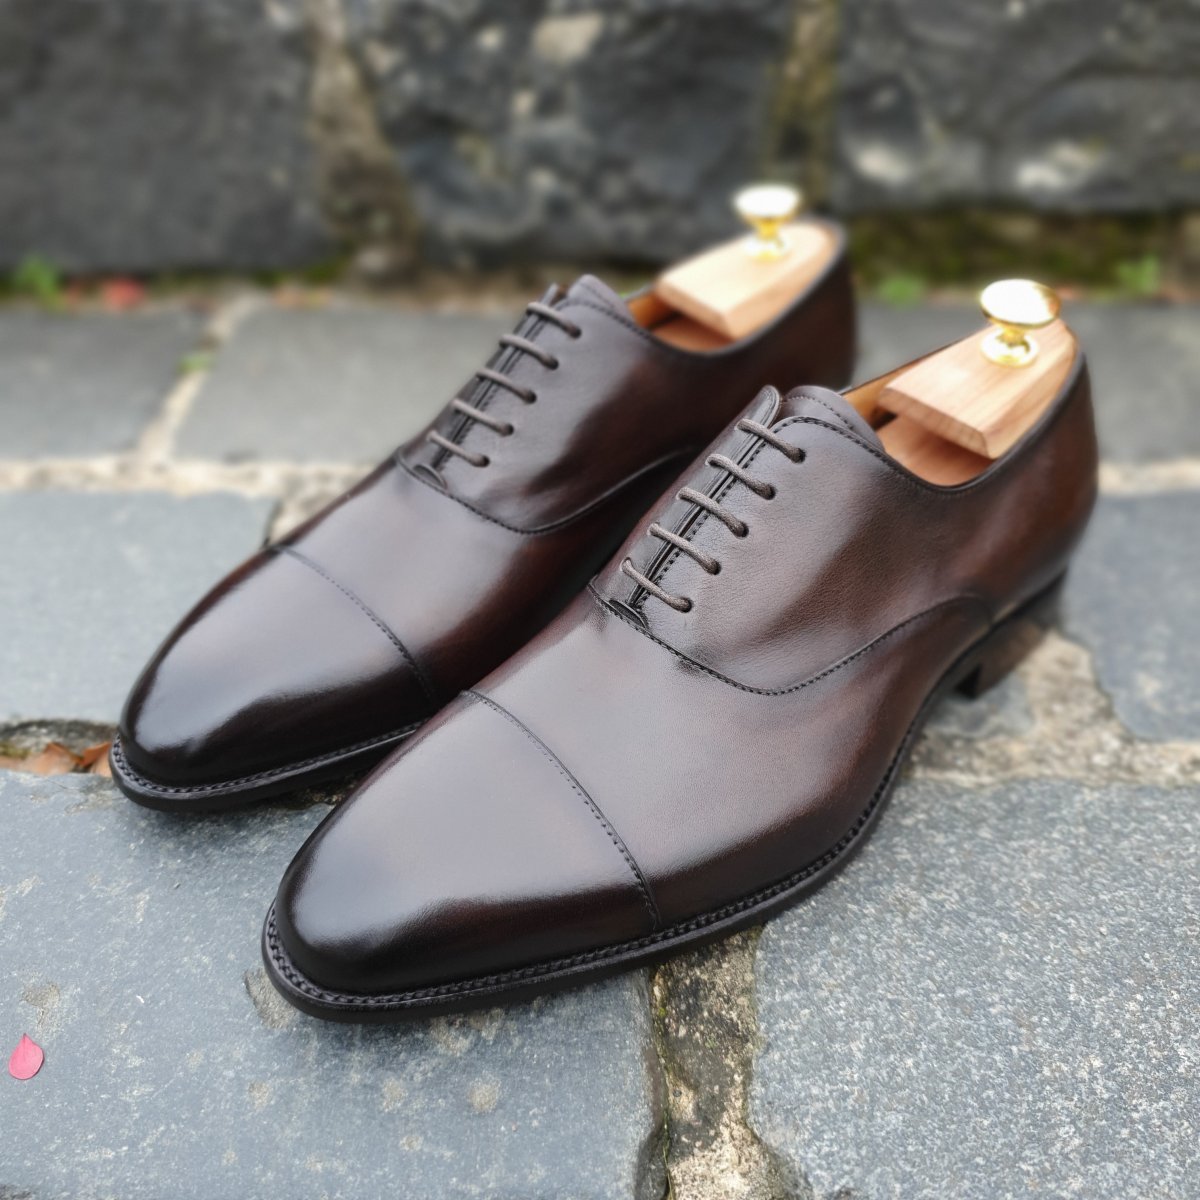 Brown derby shoes - top 3 shoes